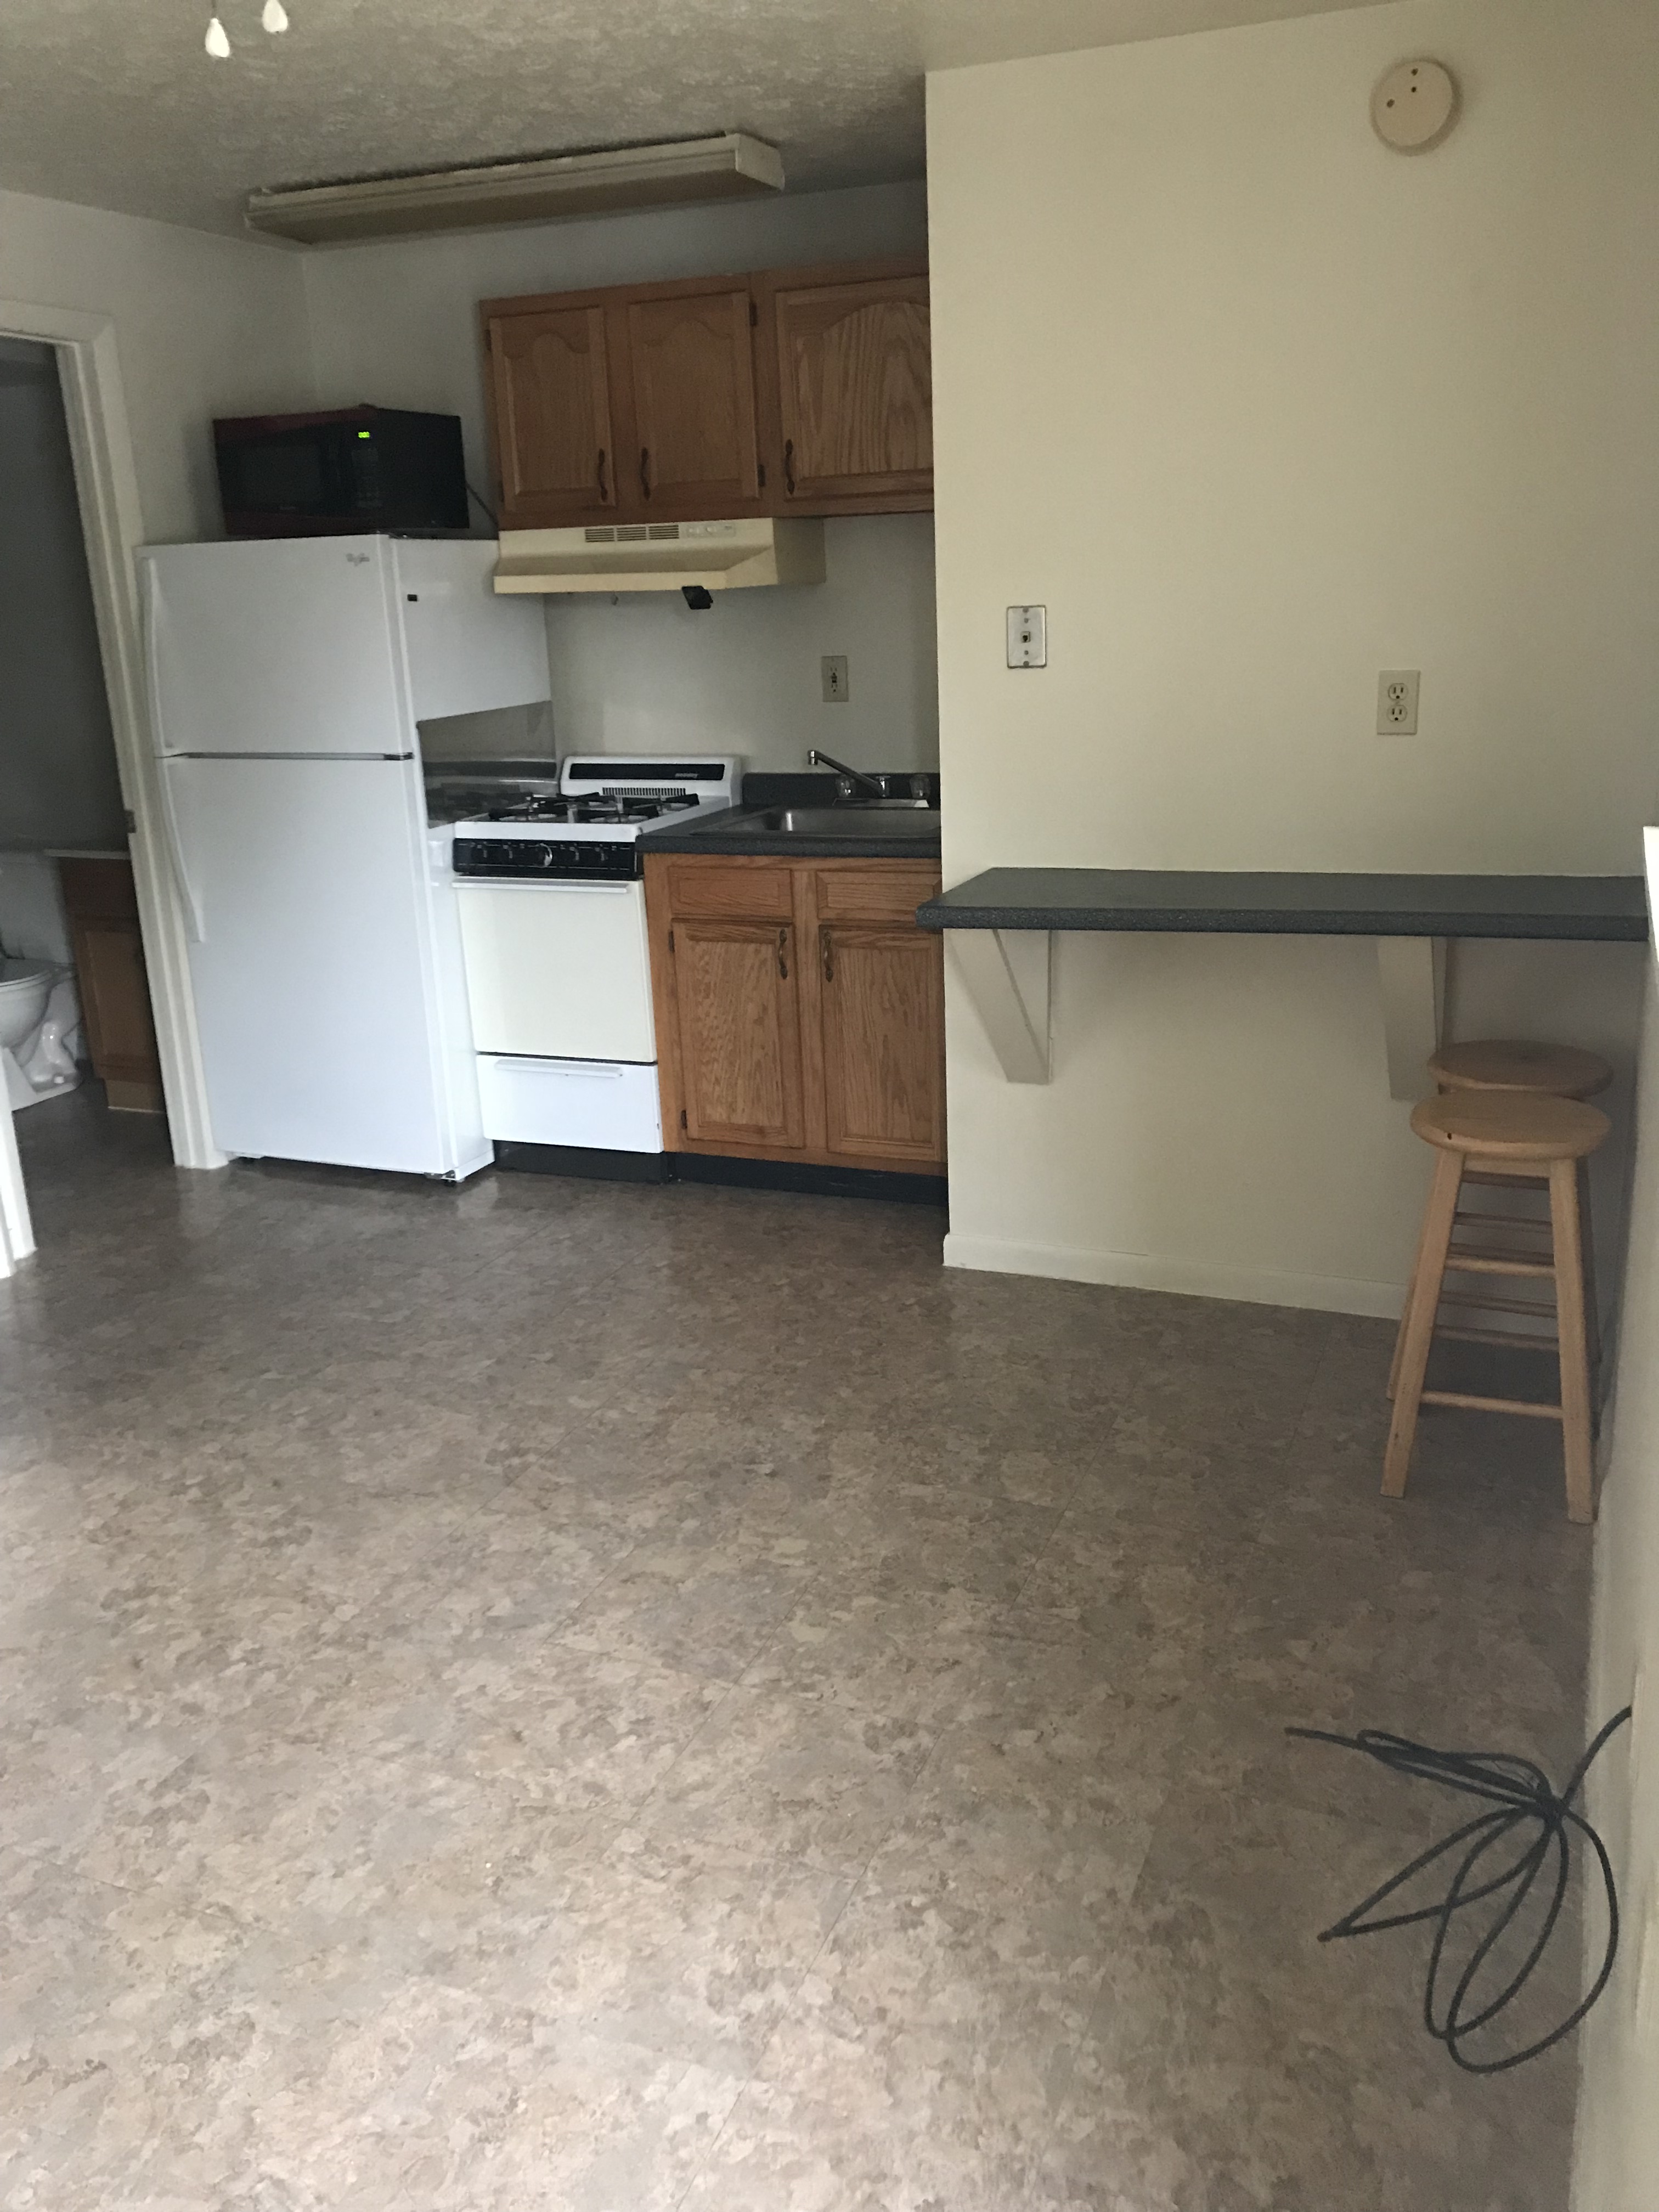 Frick-Apartment-Rentals-Indiana-PA-15701-250-Elkin-Ave5